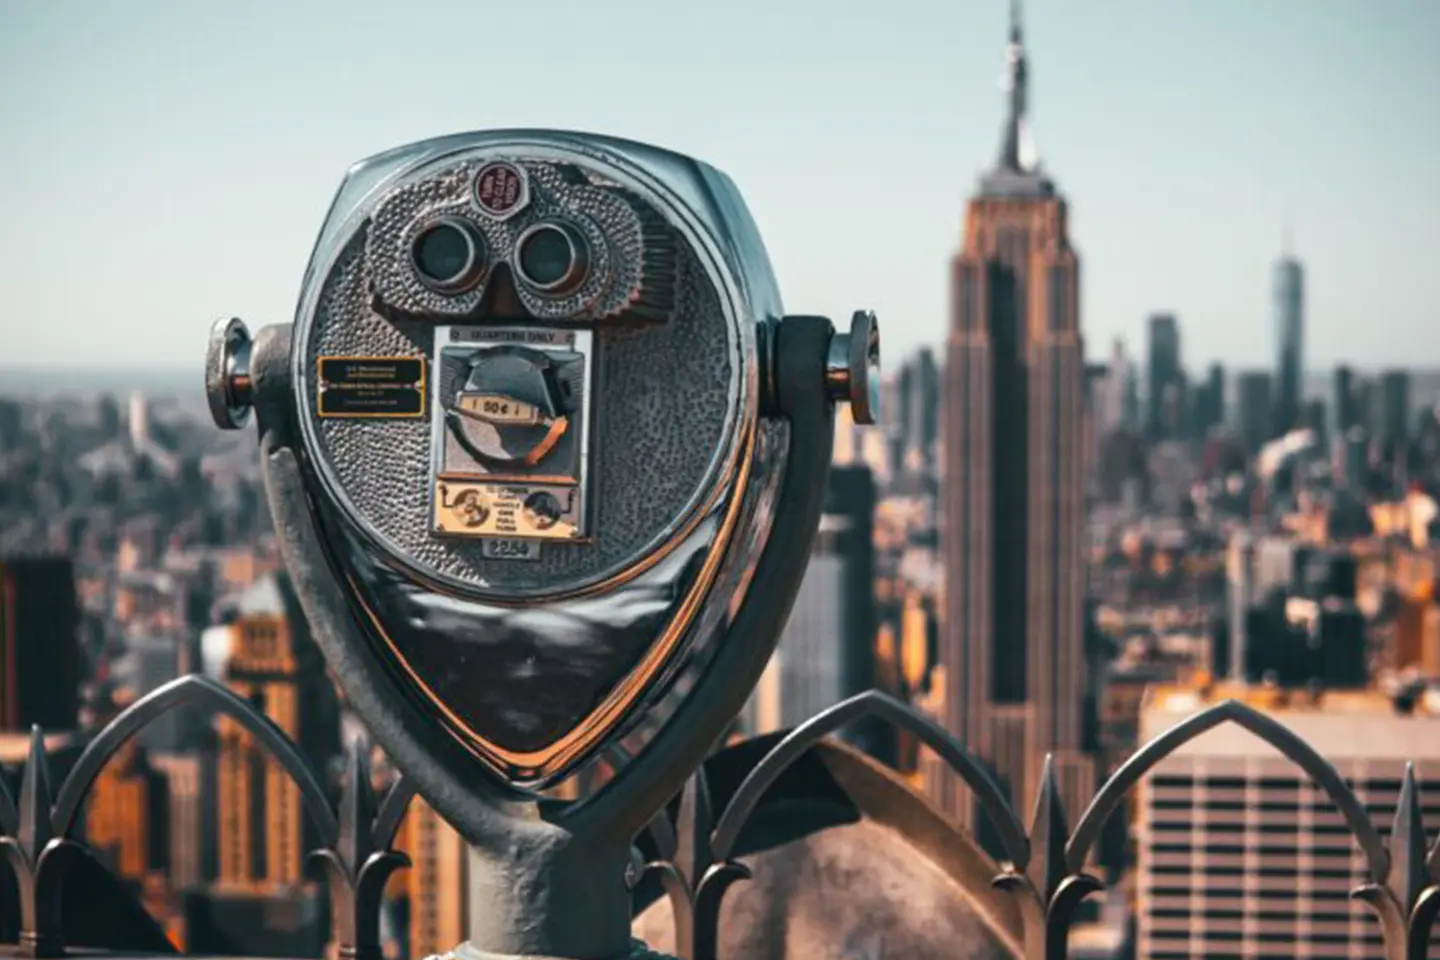 Coin-operated binoculars overlooking a cityscape with Manhattan skyscrapers.